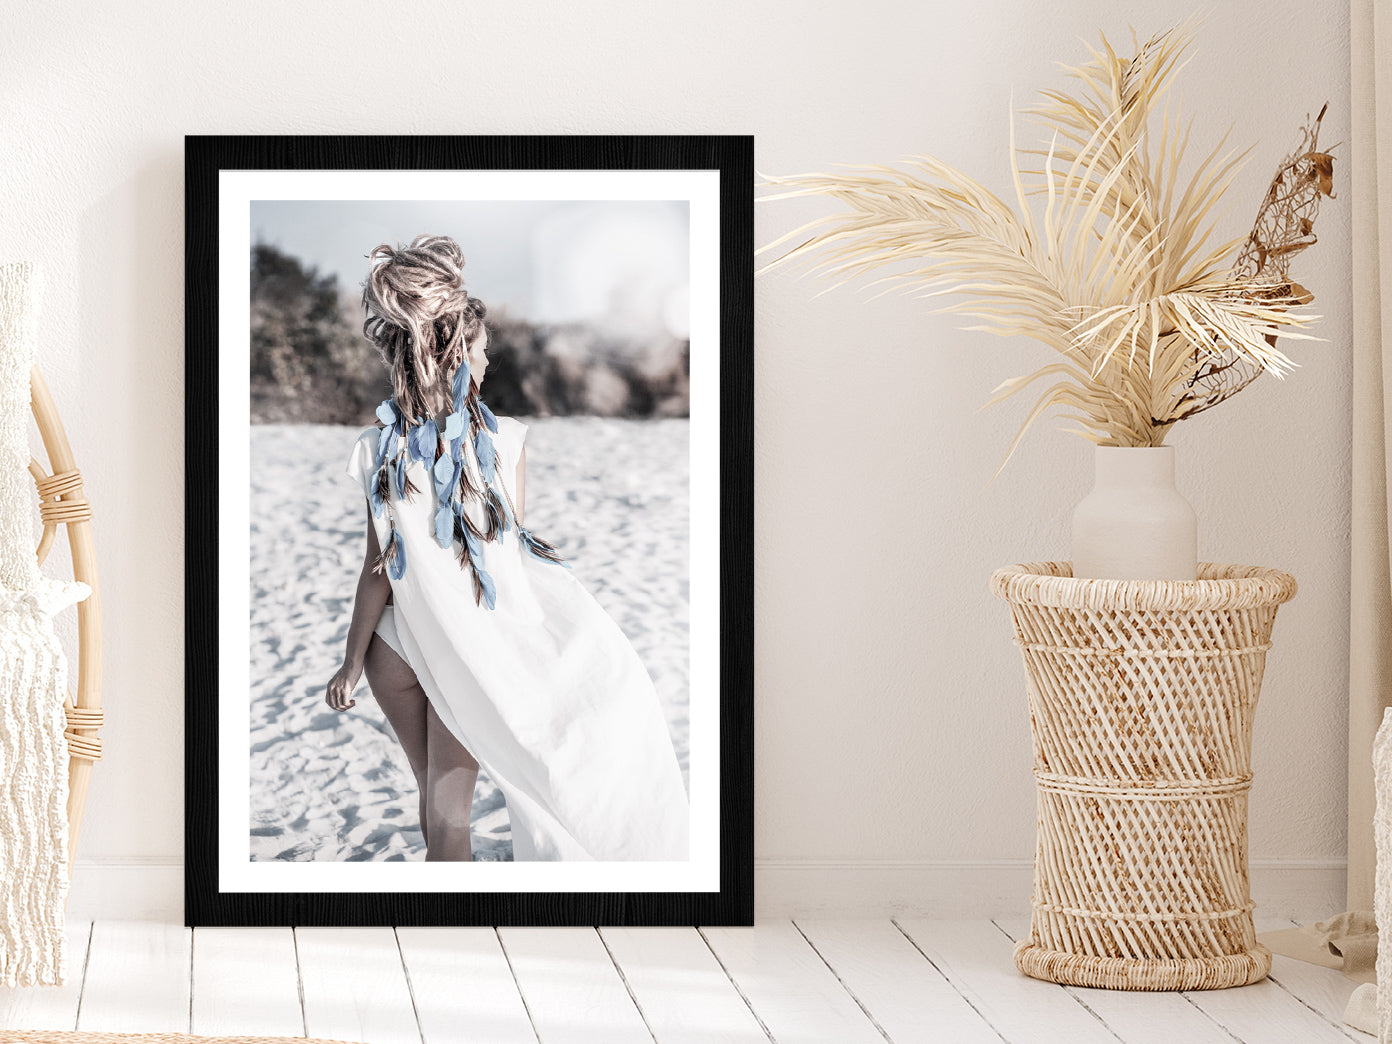 Girl on Sand Beach View Photograph Glass Framed Wall Art, Ready to Hang Quality Print With White Border Black